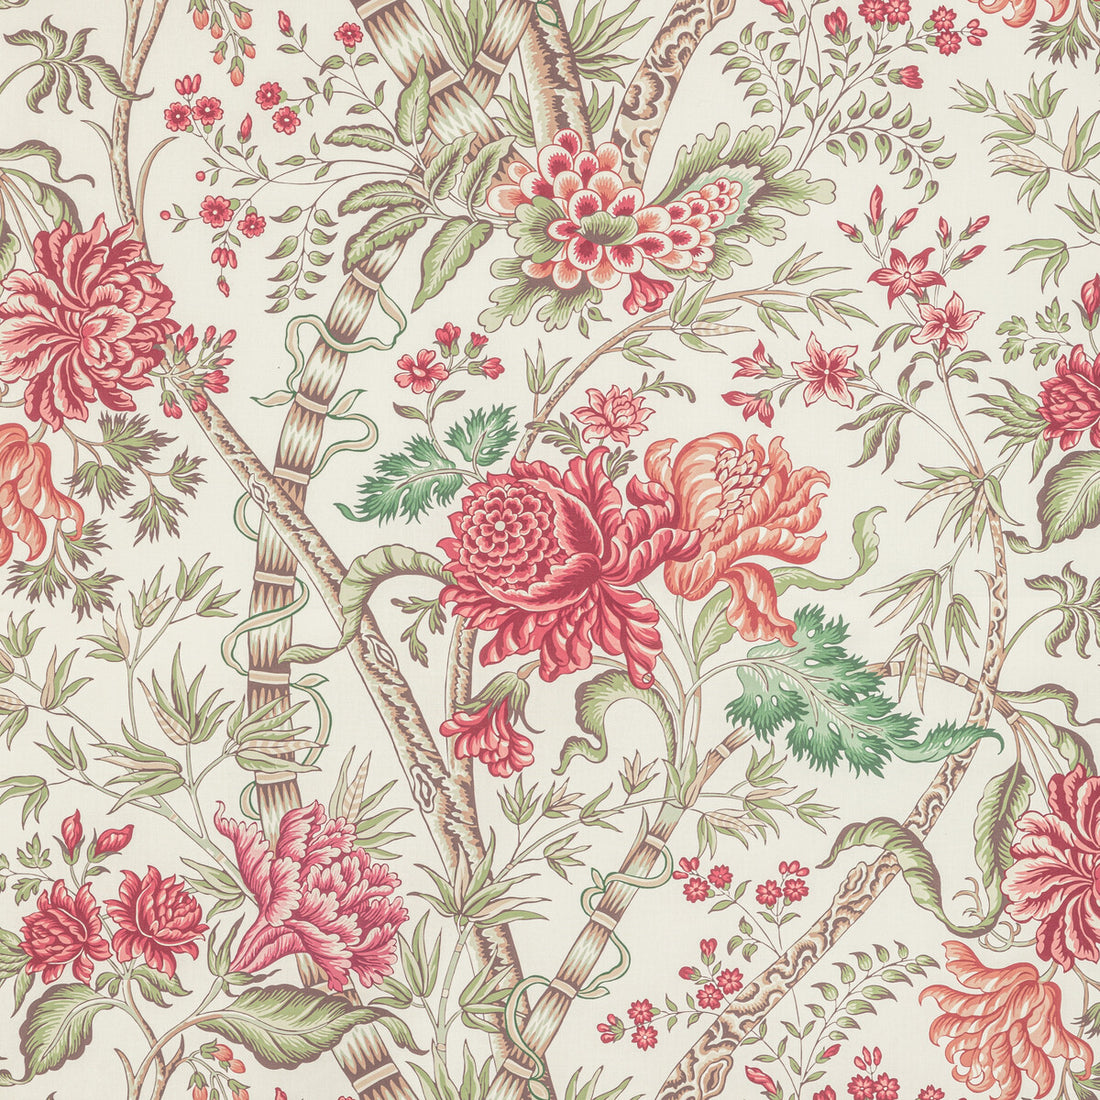 Luberon Print fabric in berry/leaf color - pattern 8022100.73.0 - by Brunschwig &amp; Fils in the Manoir collection